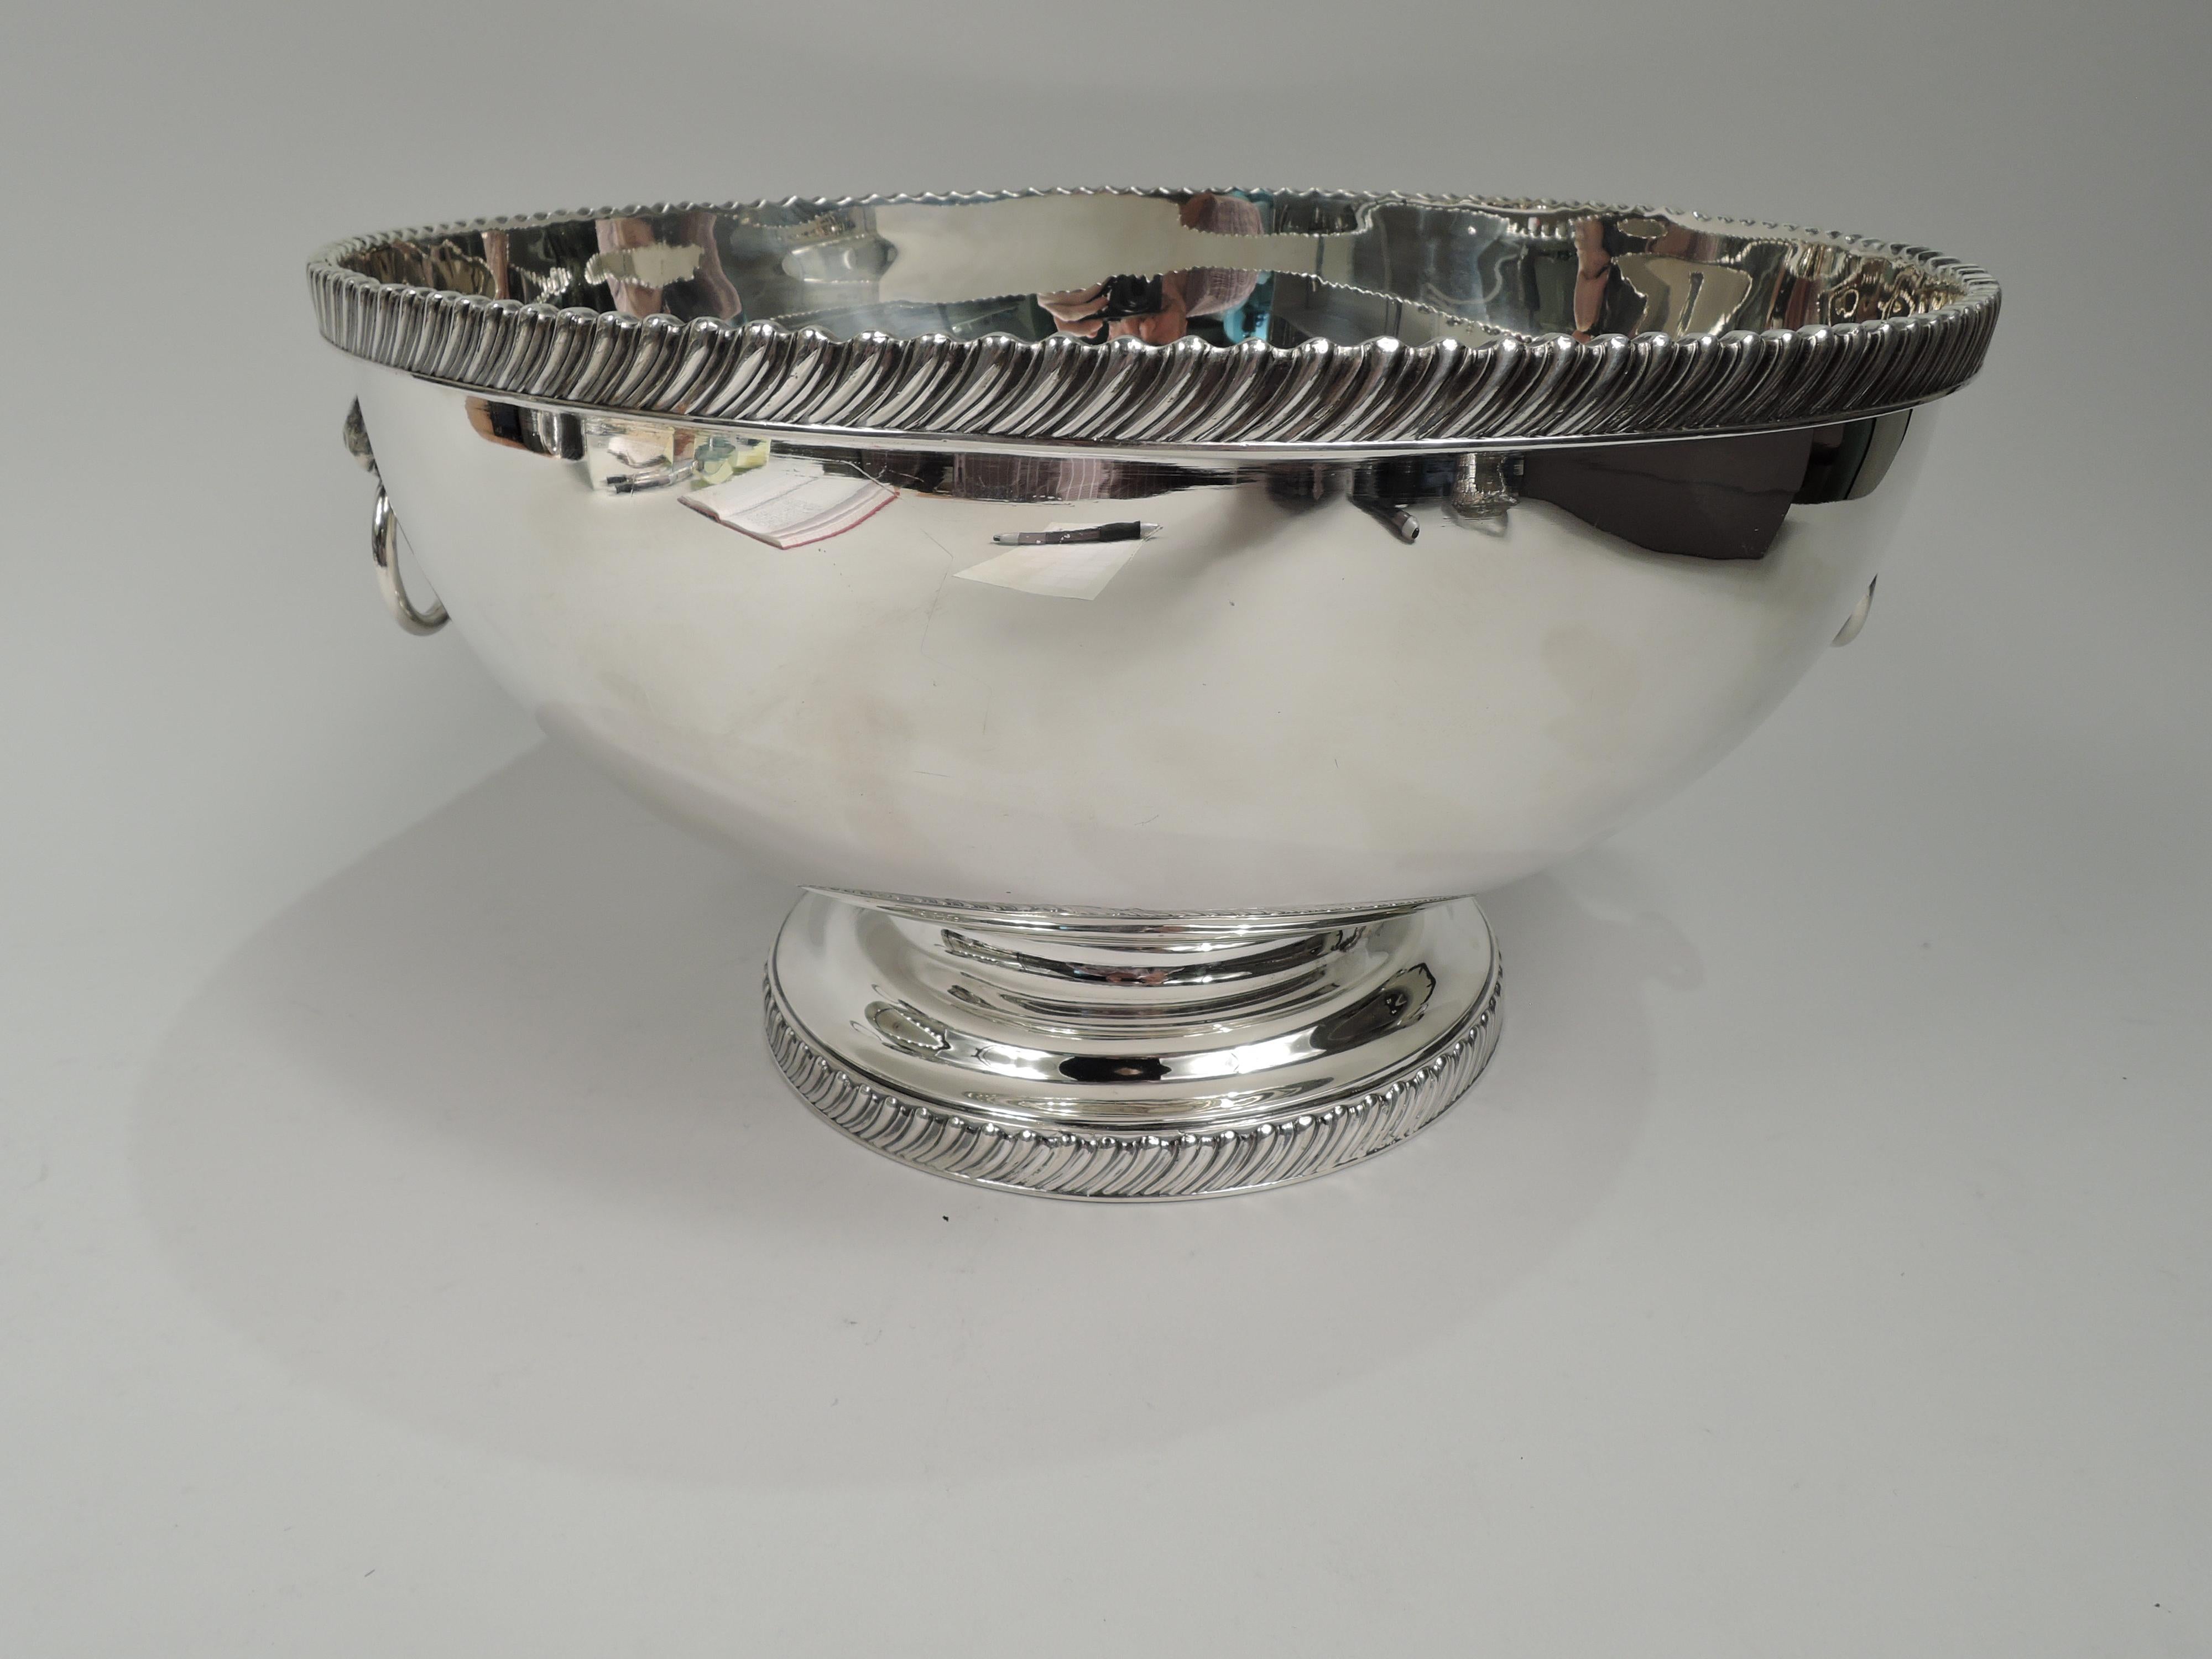 Traditional Georgian sterling silver bowl. Retailed by Cartier in New York. Curved sides and raised foot. Cast lion’s head mounts with loose rings. Cast gadrooned rims. Old fashioned and substantial with plenty of room for engraving. Perfect for